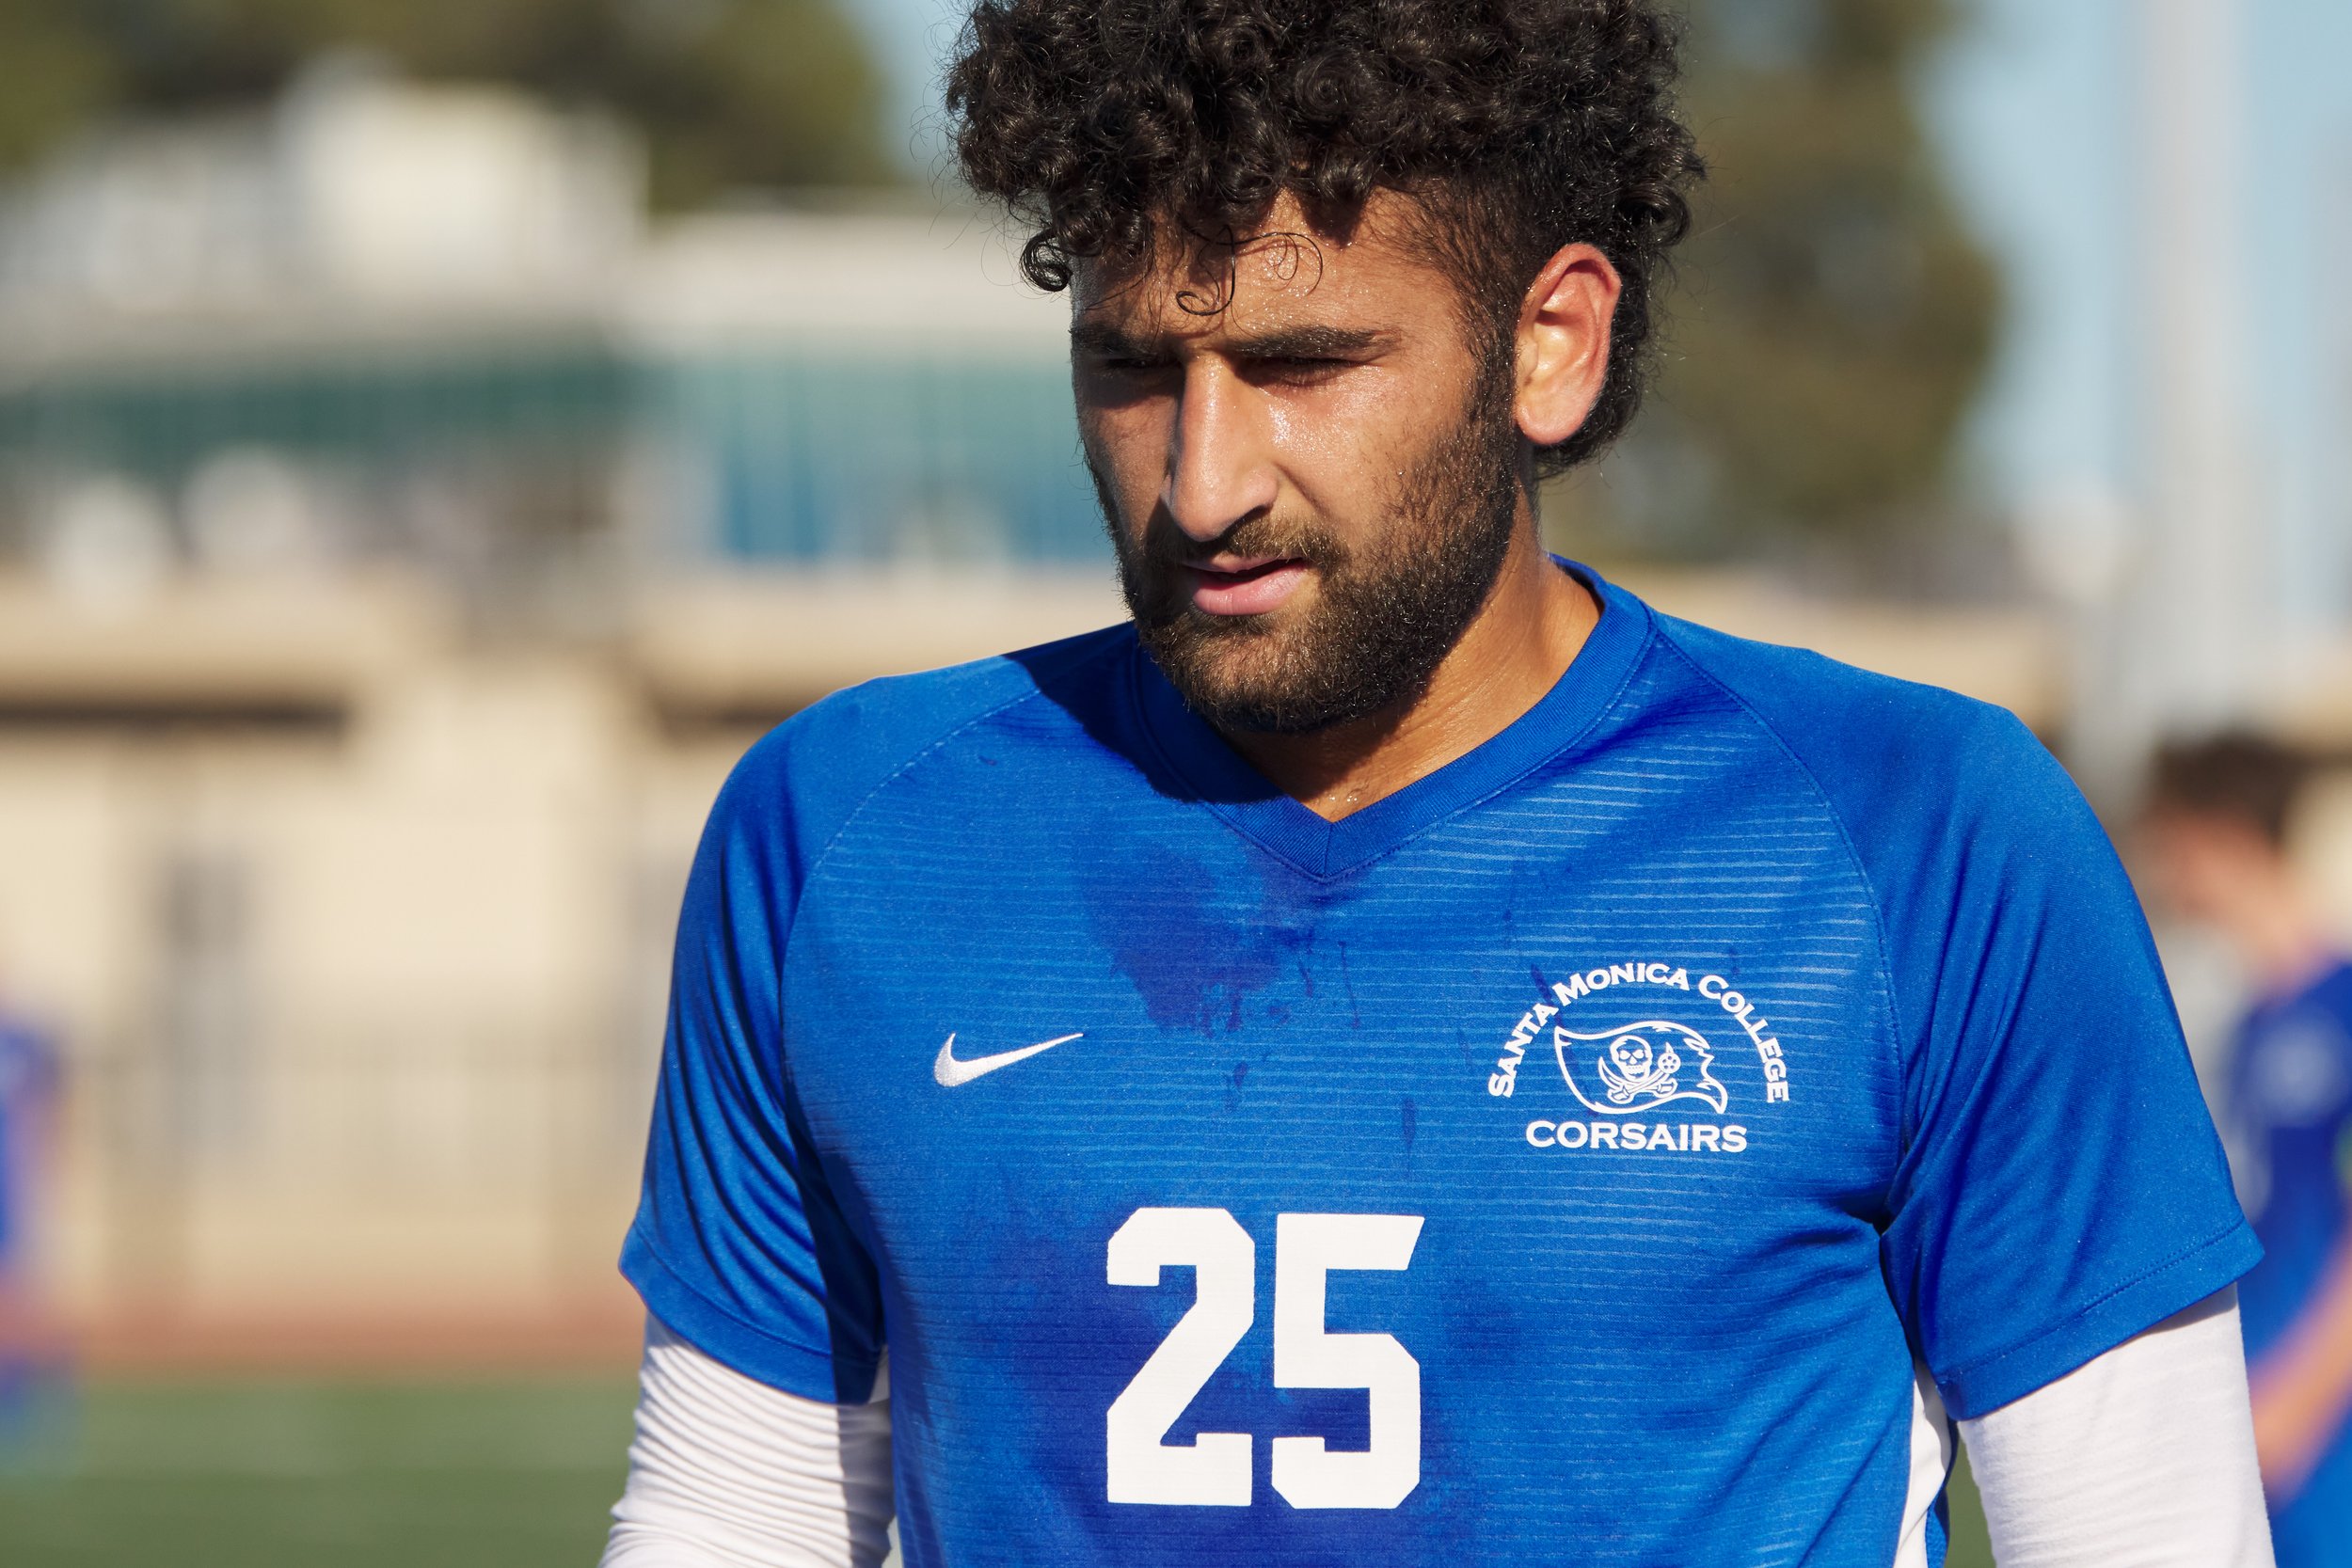  Santa Monica College Corsairs' Adam Abou-Hamad during the men's soccer match against the Rio Hondo College Roadrunners on Friday, Sept. 24, 2022, at Corsair Field in Santa Monica, Calif. The Corsairs won 2-1. (Nicholas McCall | The Corsair) 